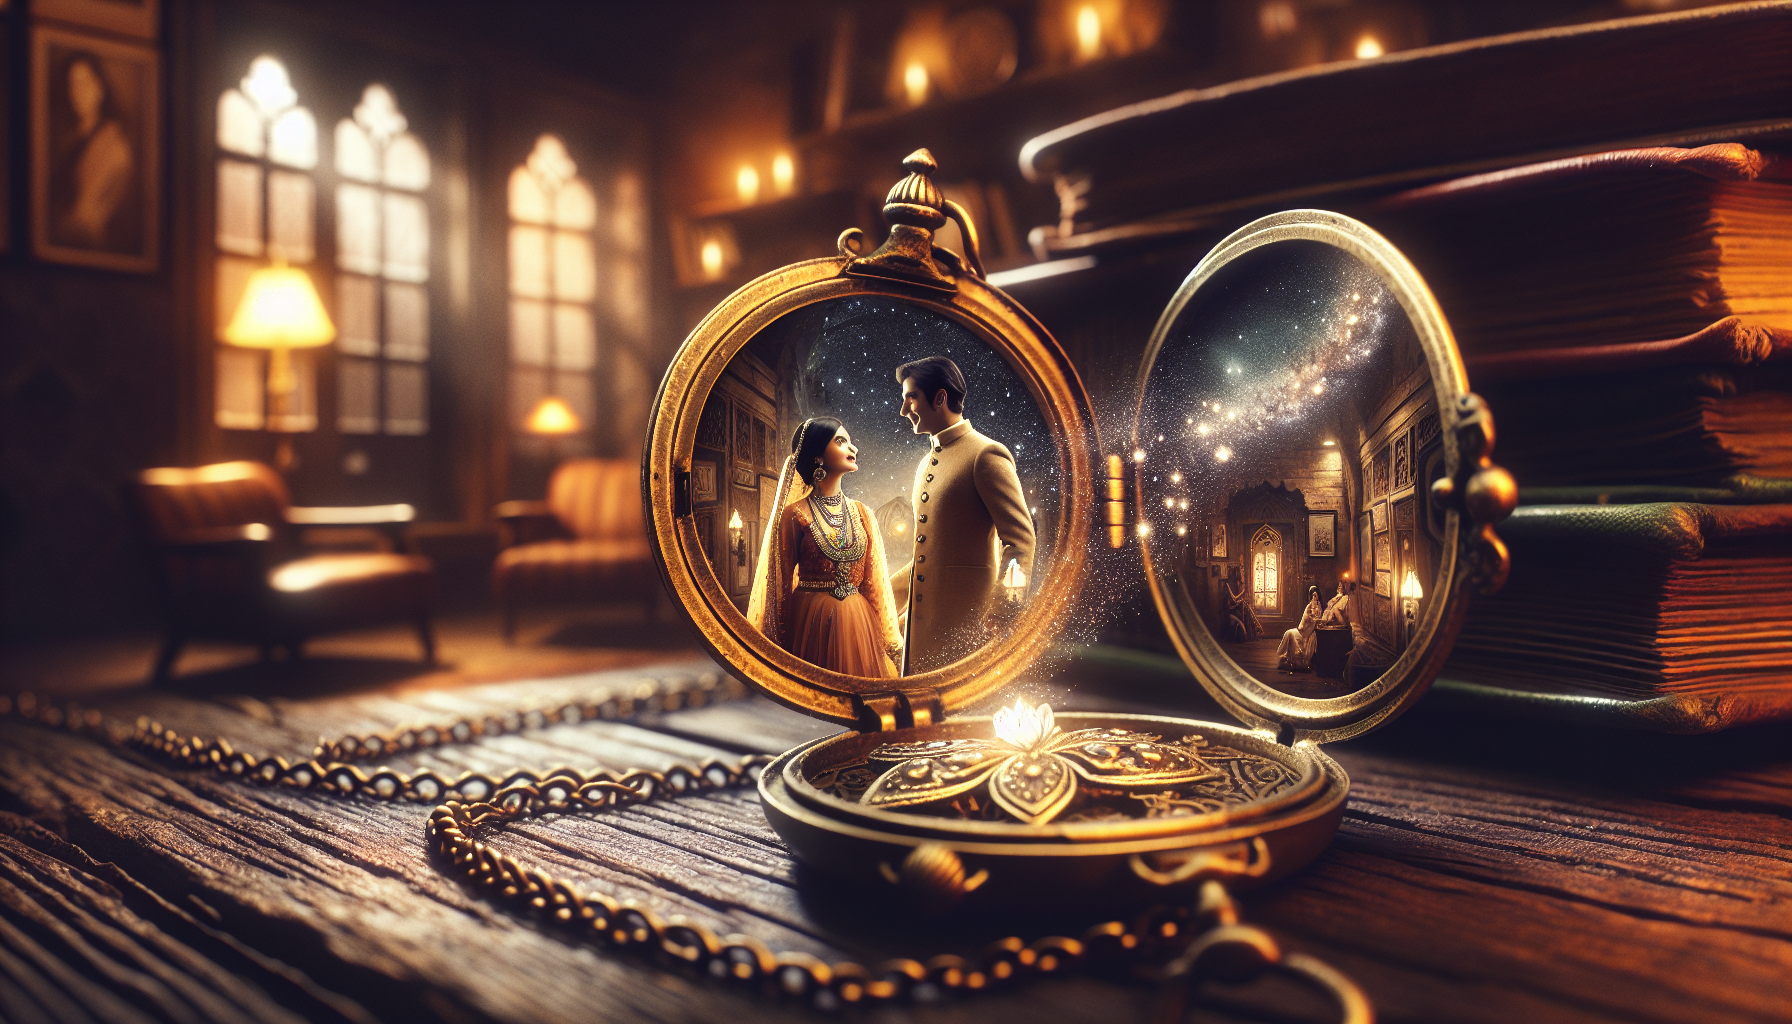 Envision an enchanting scene showcasing the magic of locket necklaces. A vintage golden locket necklace lays open on a rustic wooden table, revealing two old sepia-toned photographs inside. Through th